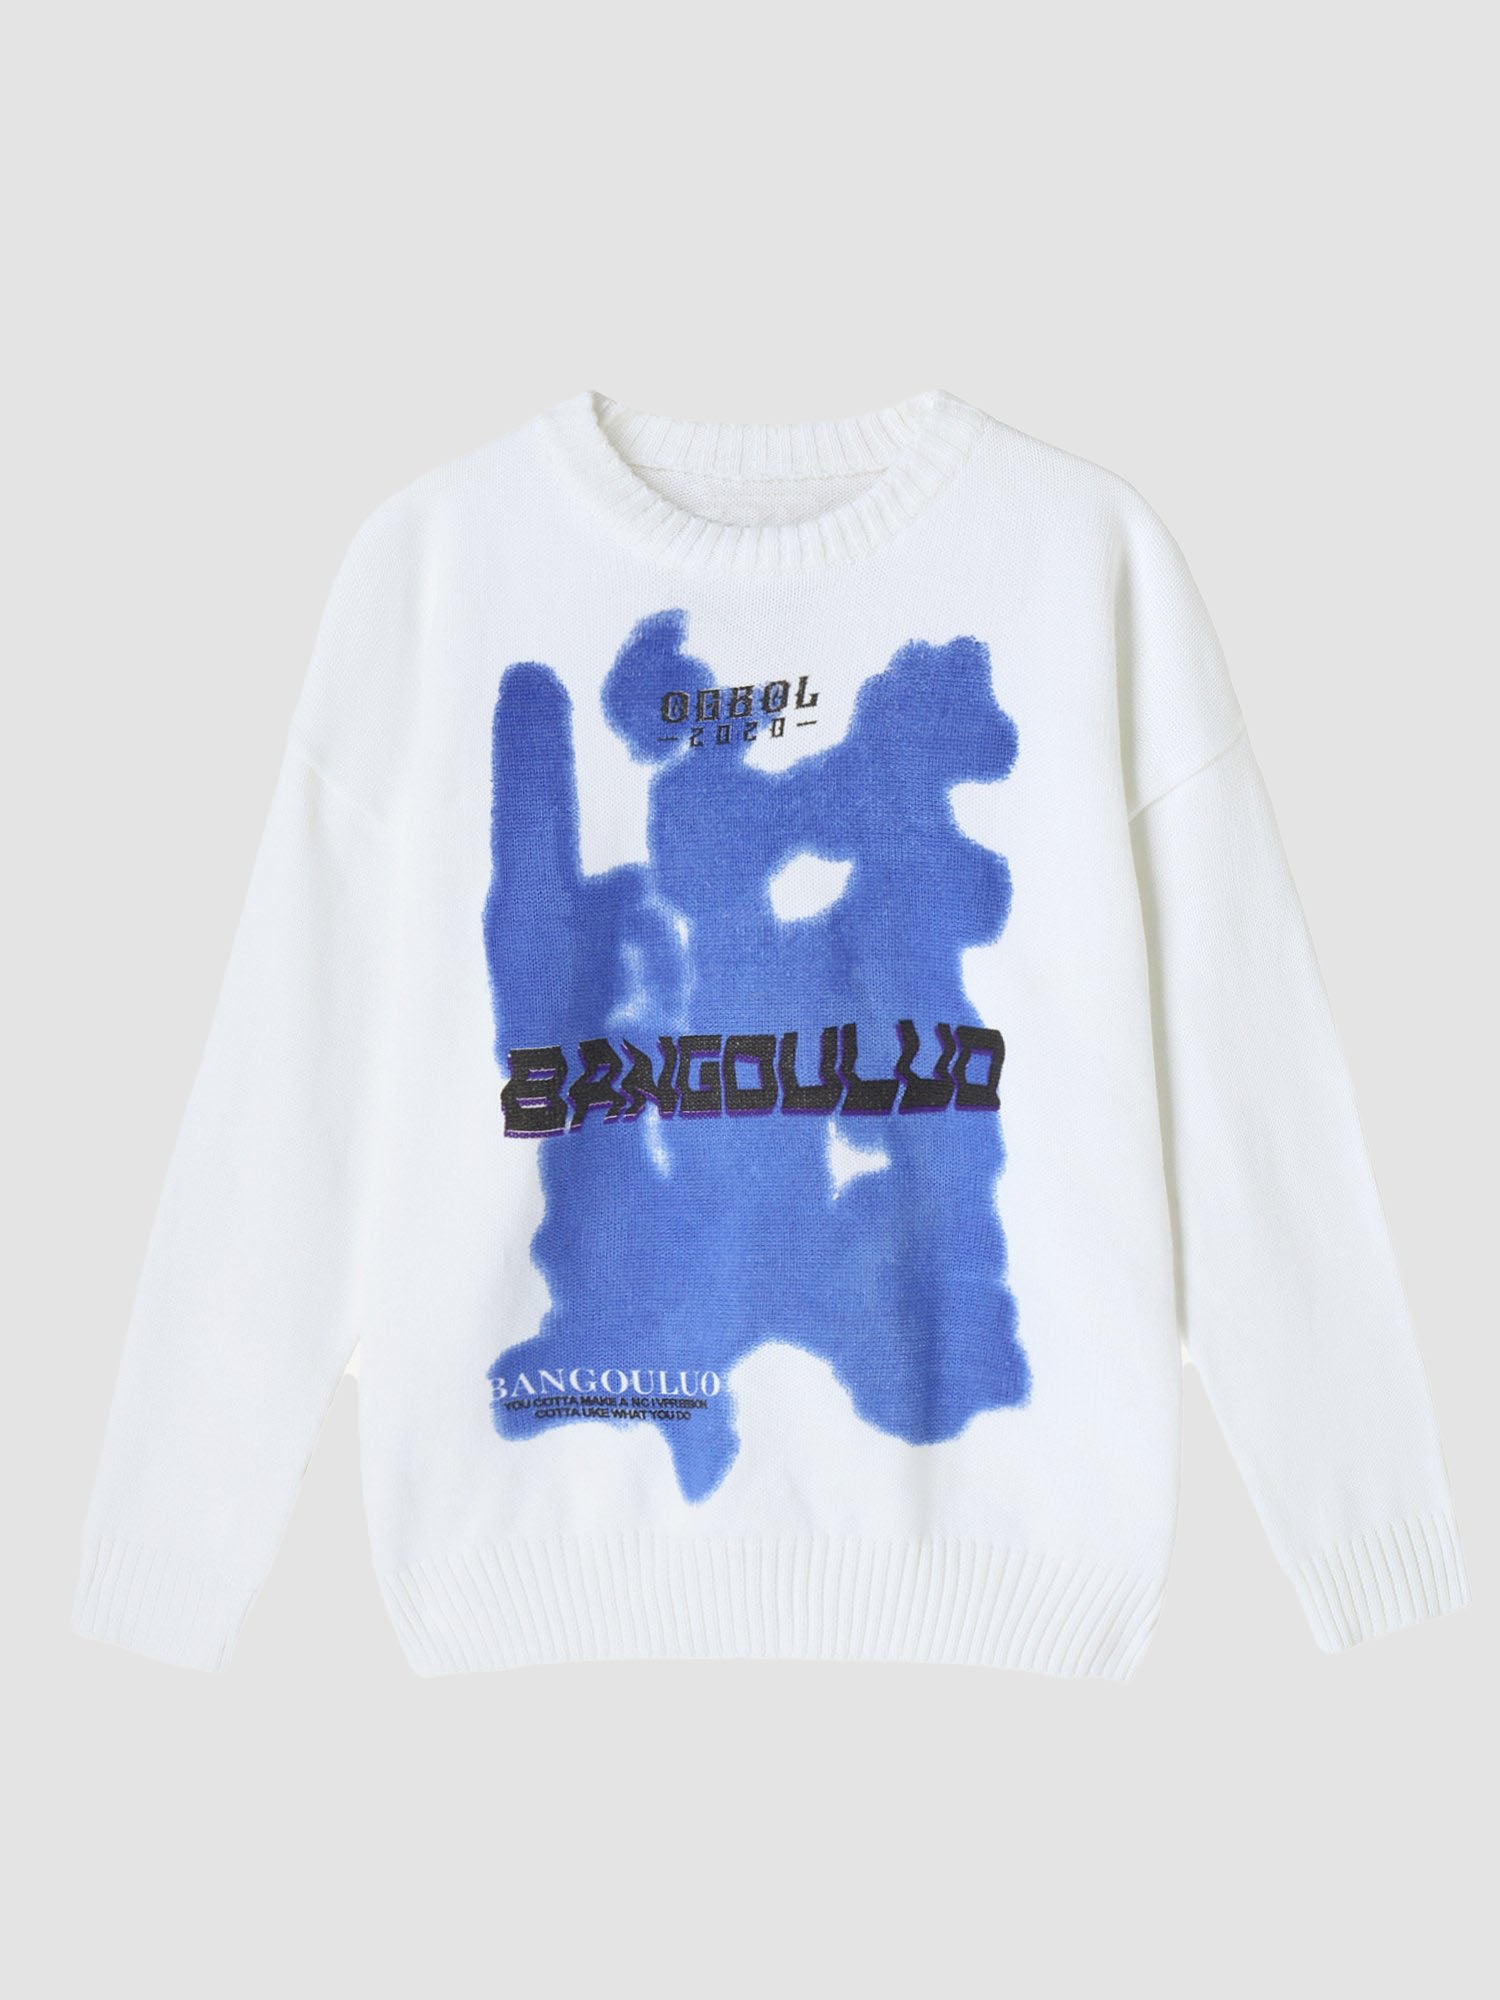 JUSTNOTAG Vintage Graffiti Letter Jacquard Knitted Sweater